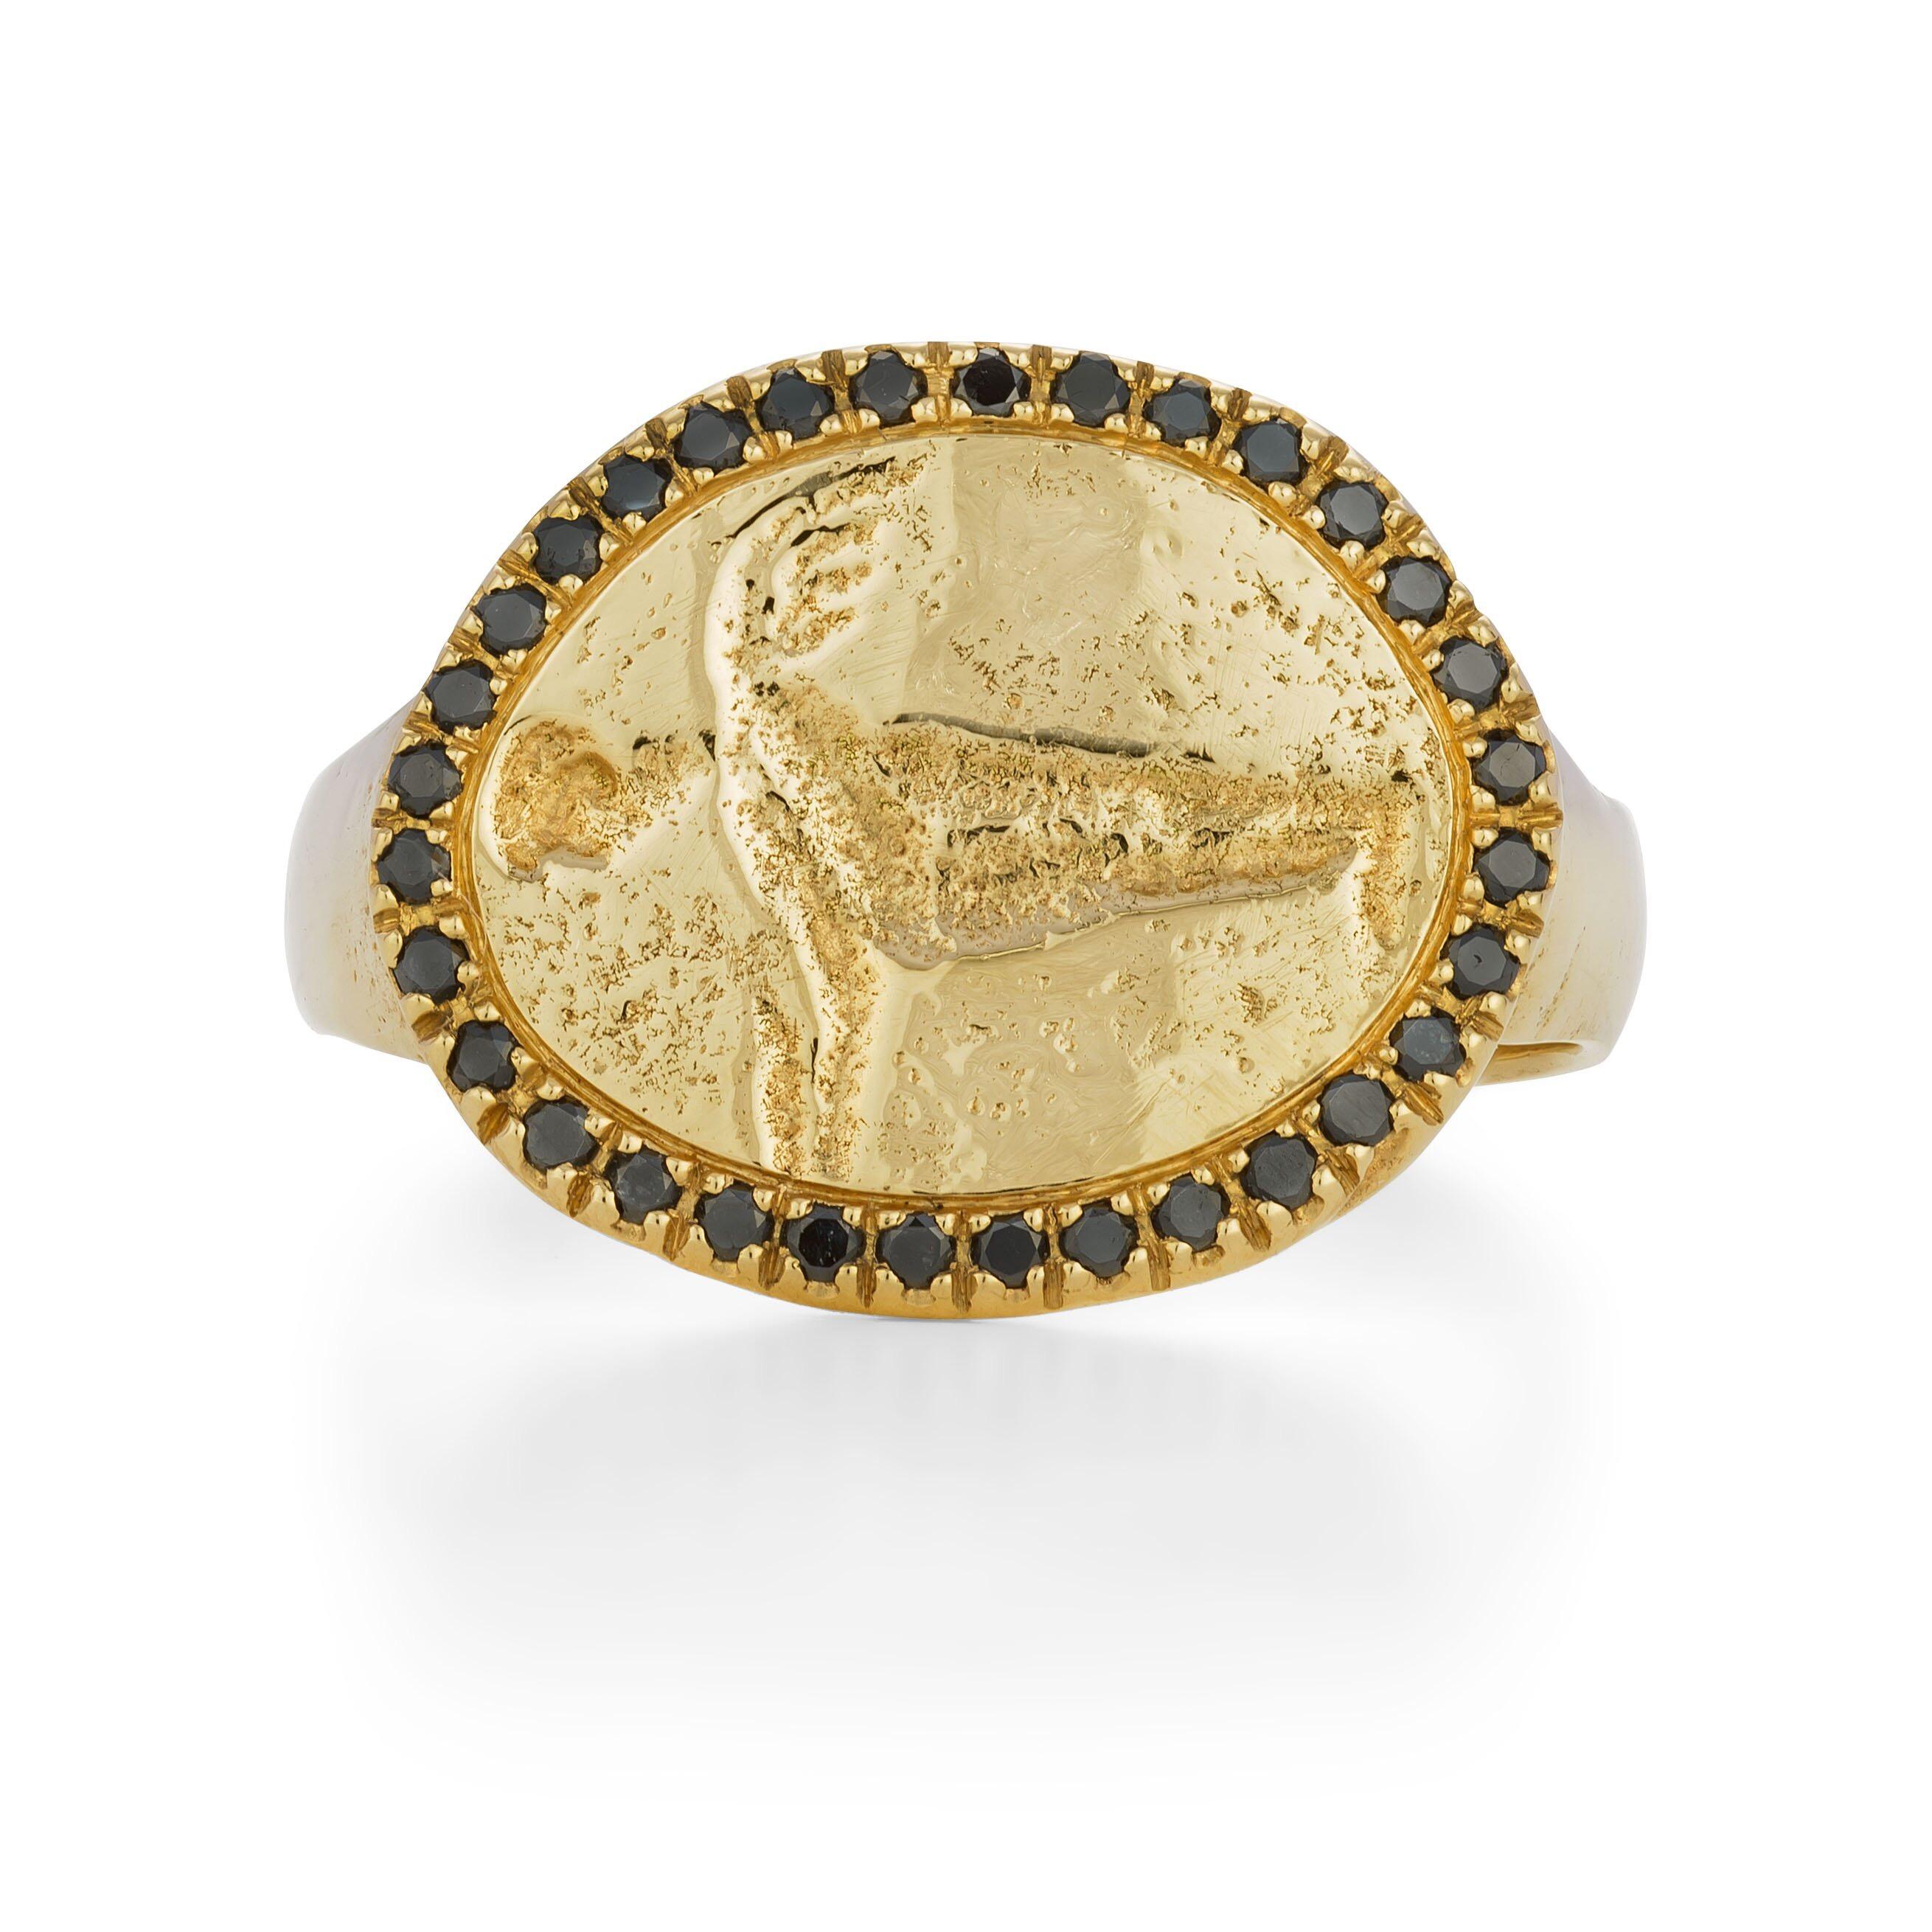 Peristera Ring with Black Diamond, 18 Karat Yellow Gold
In a classic signet ring shape the engraved design is encircled with a ring of black diamonds, set in 18K solid yellow gold. Handcrafted and individually cast in solid yellow gold. Handcrafted